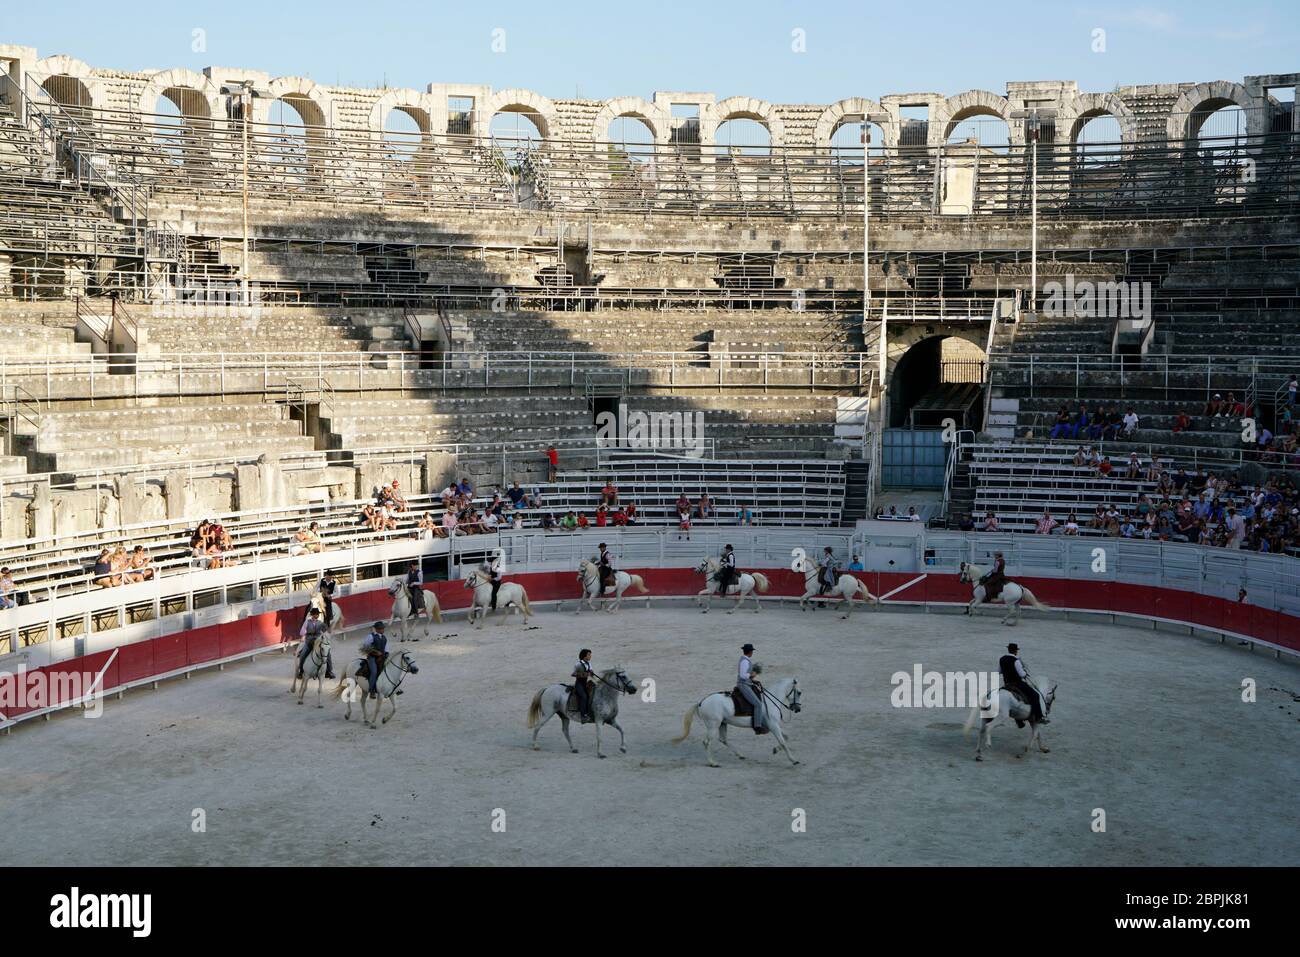 The Camargue cowboys aka Gardians showing their skill of horse riding and cattle herding in ancient Roman Amphitheater. Arles.Bouches-du-Rhone.Alpes-Cote d'Azur.France Stock Photo